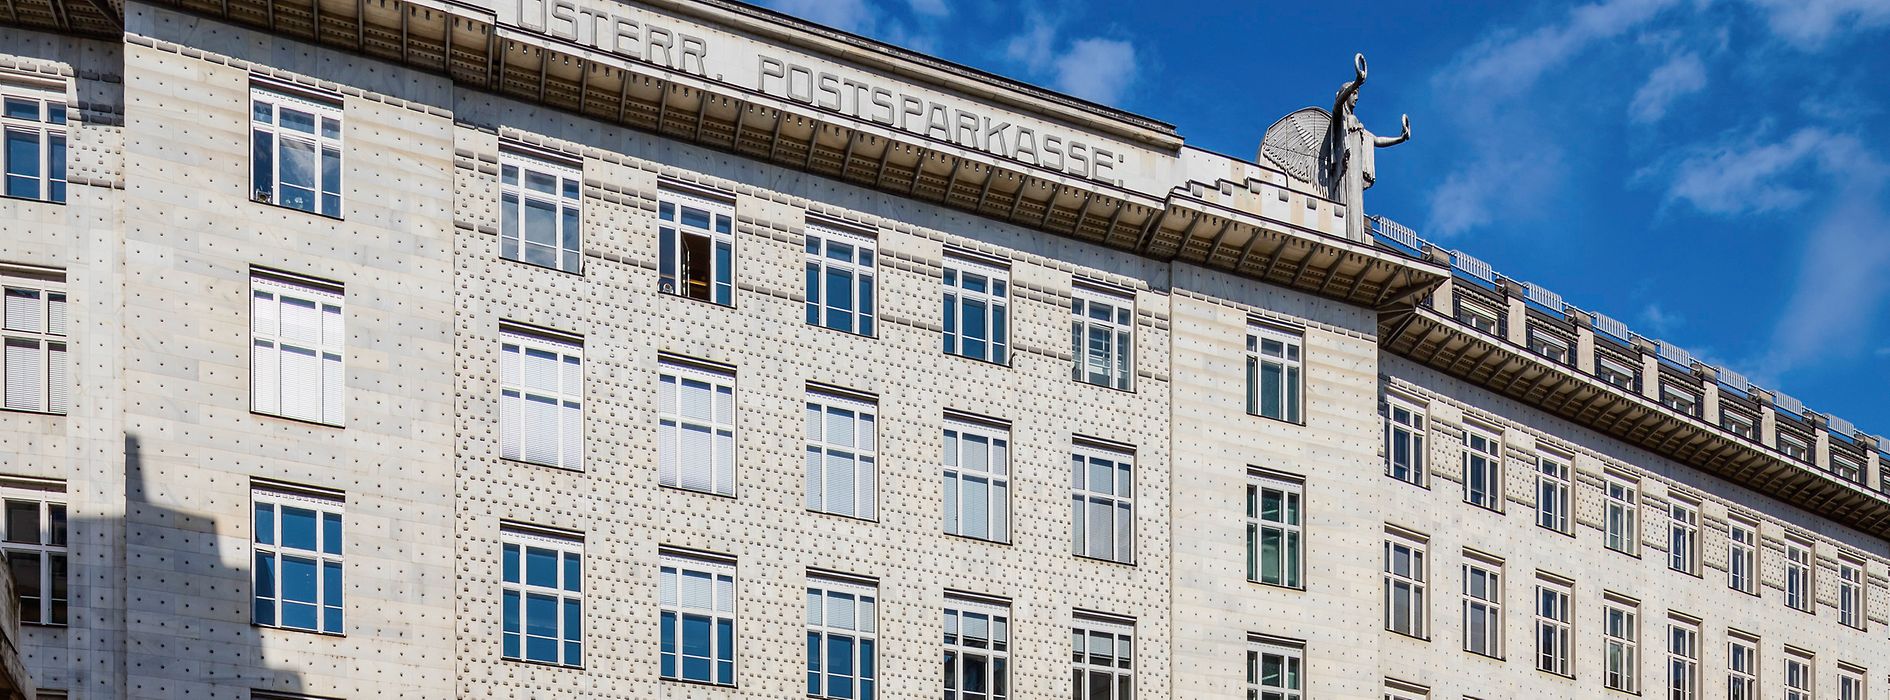 Austrian Post Savings Bank by Otto Wagner